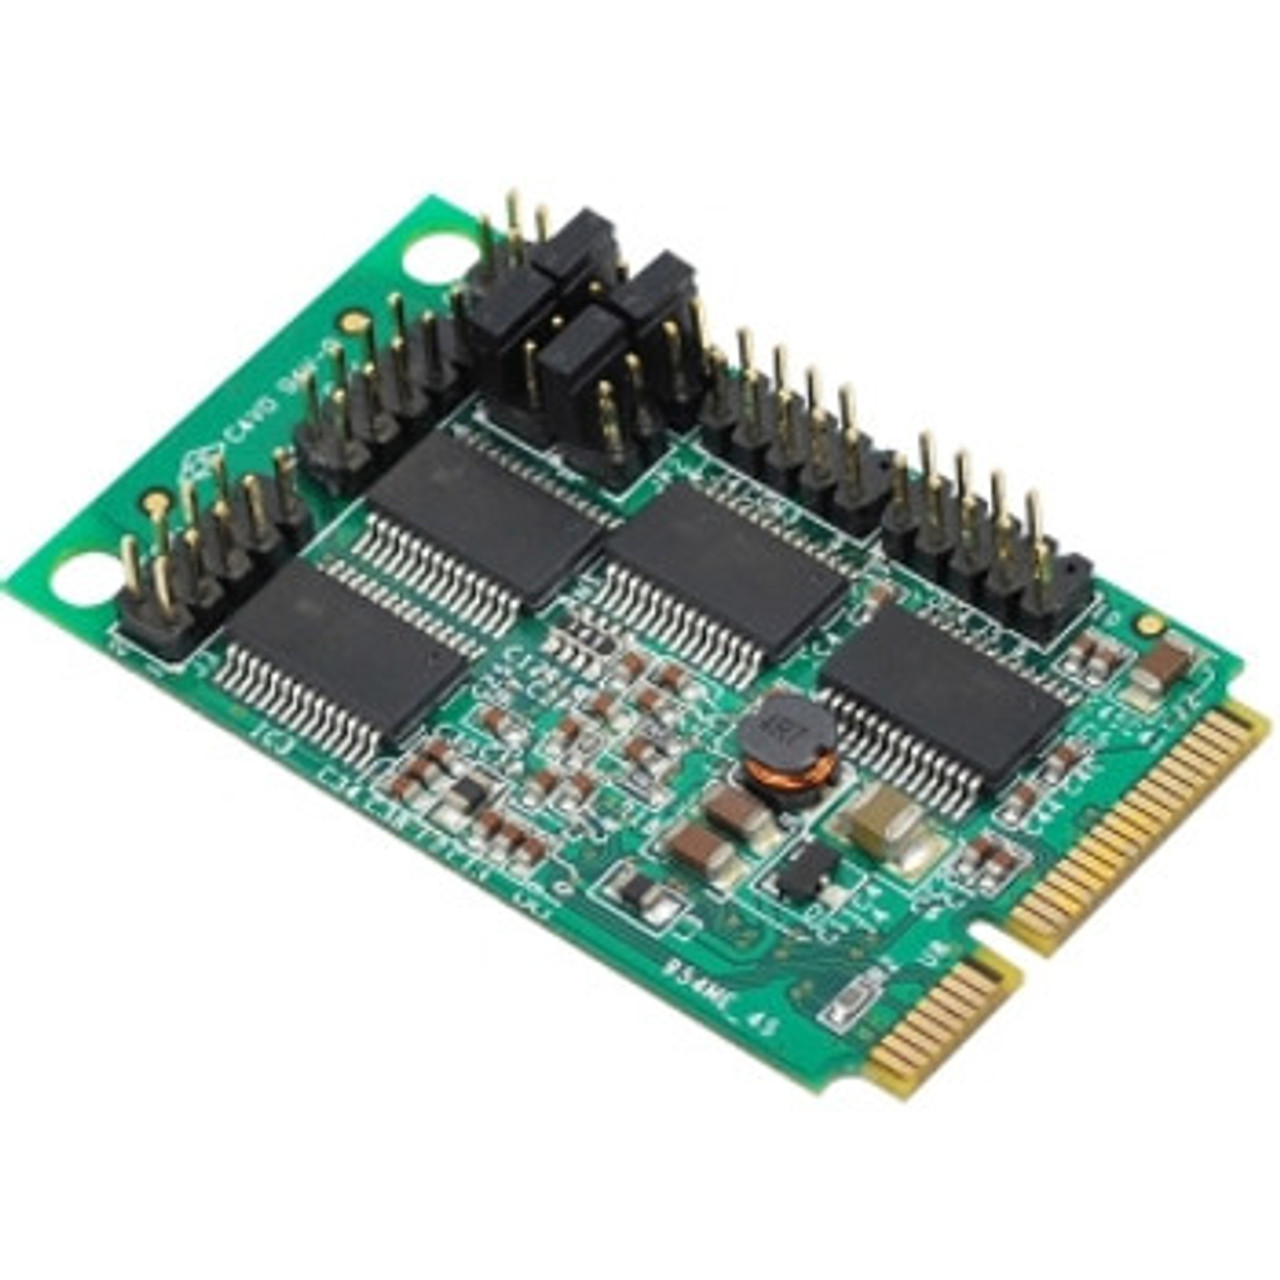 JJ-E40111-S1 | SIIG | 4-Port Rs232 Serial Mini Pcie With Power 4 X 9-Pin Db-9 Rs-232 Serial Mini Pci Express 1 Pack